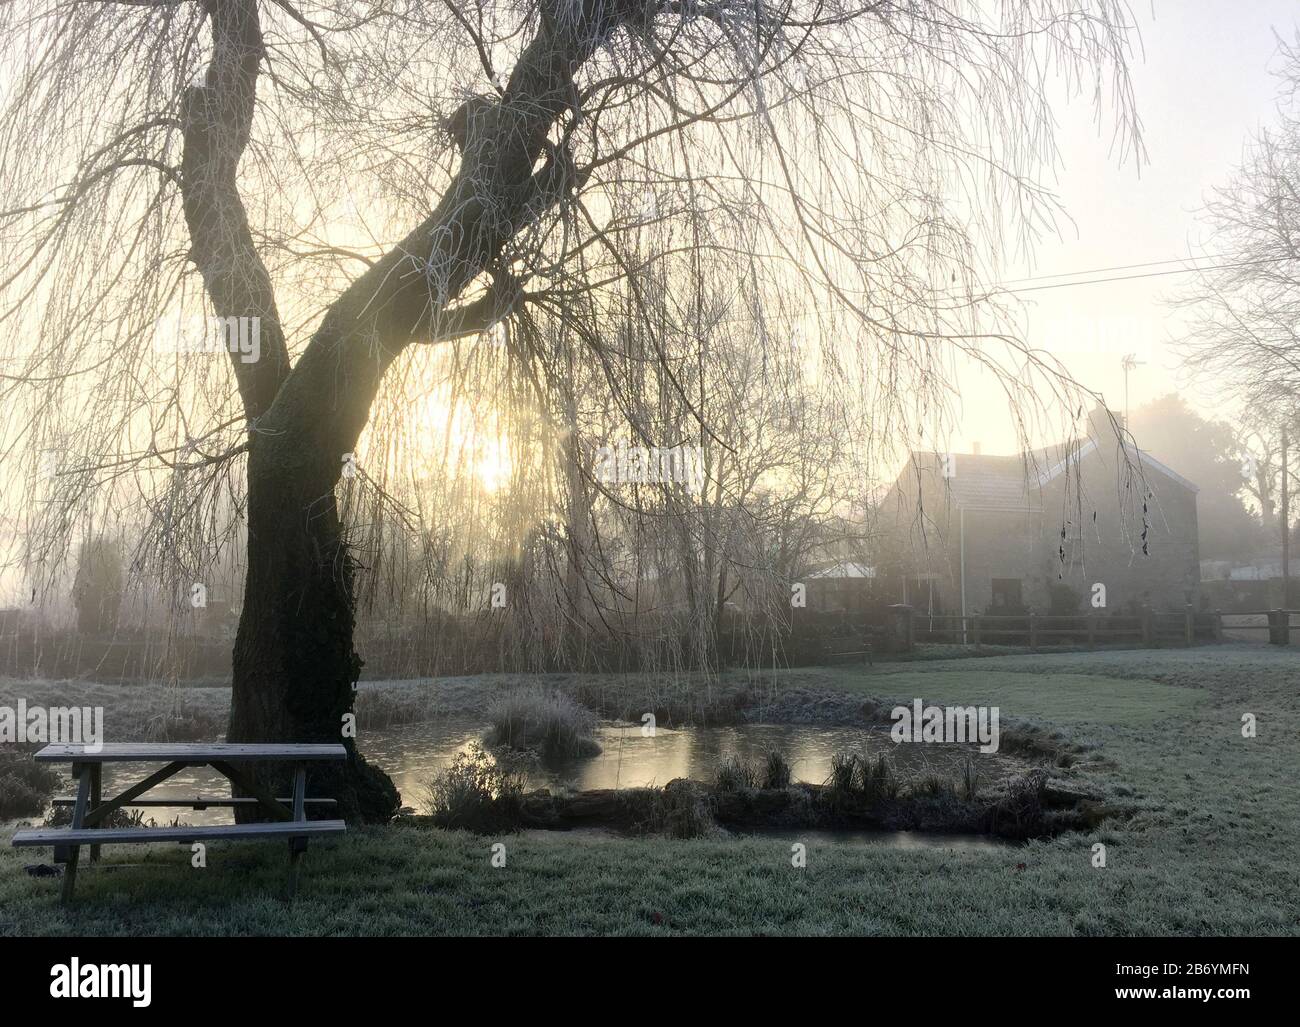 Early morning light and hoar frost, English village green and pond Stock Photo